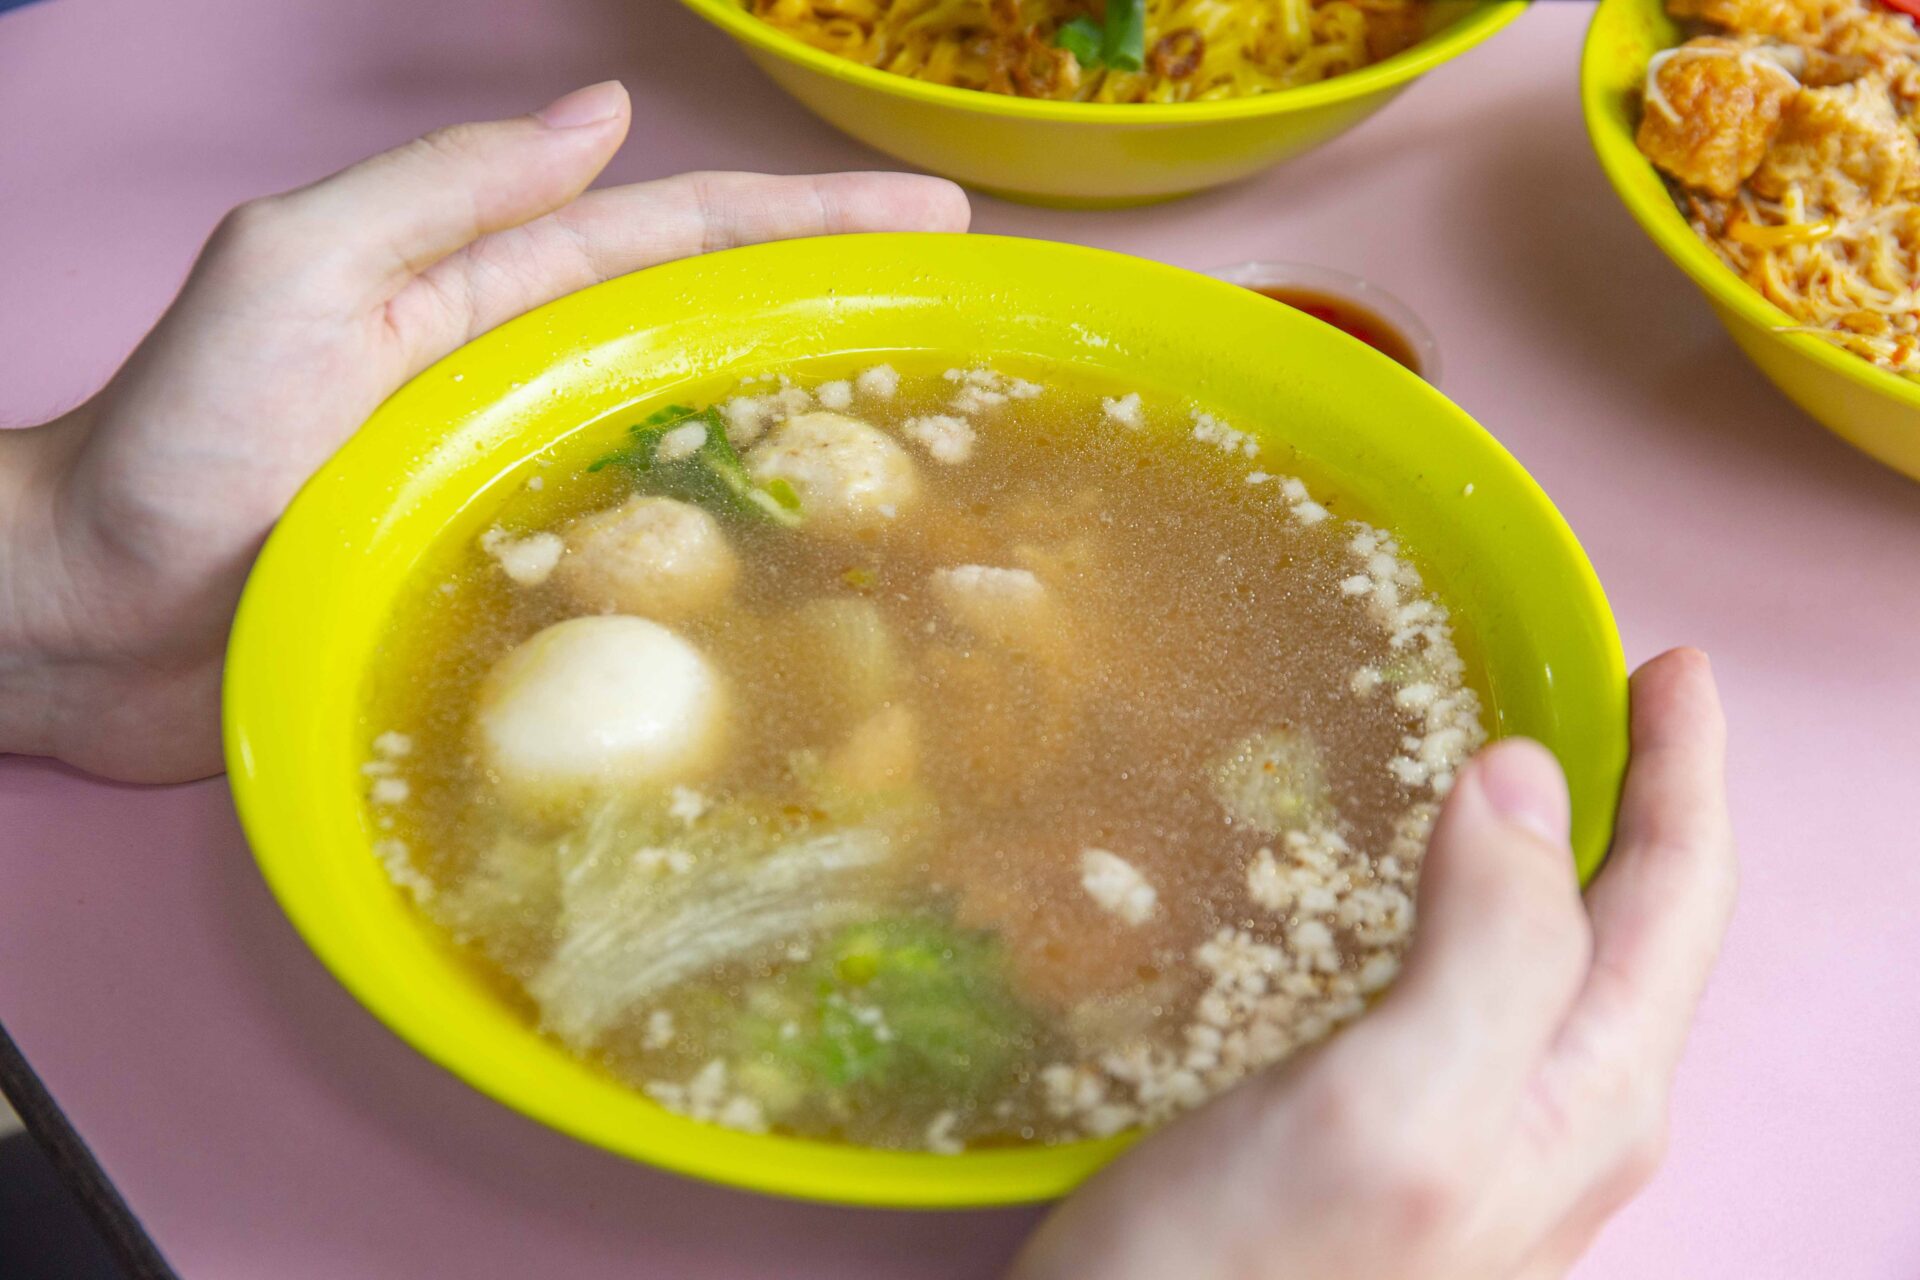 Yew Teck Food Stall - Soup